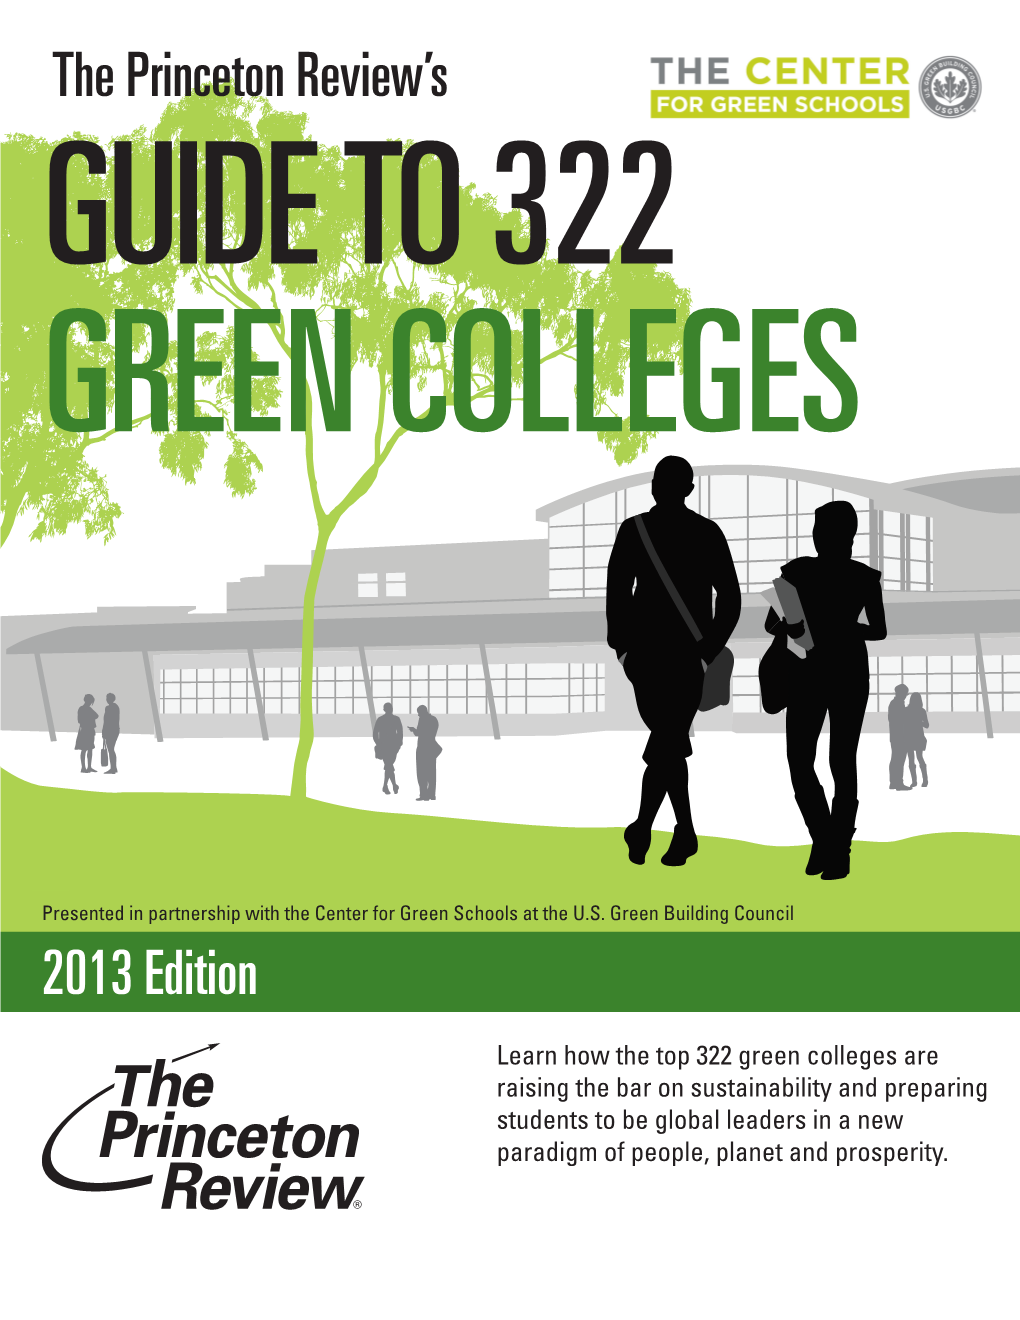 The Princeton Review's 2013 Edition